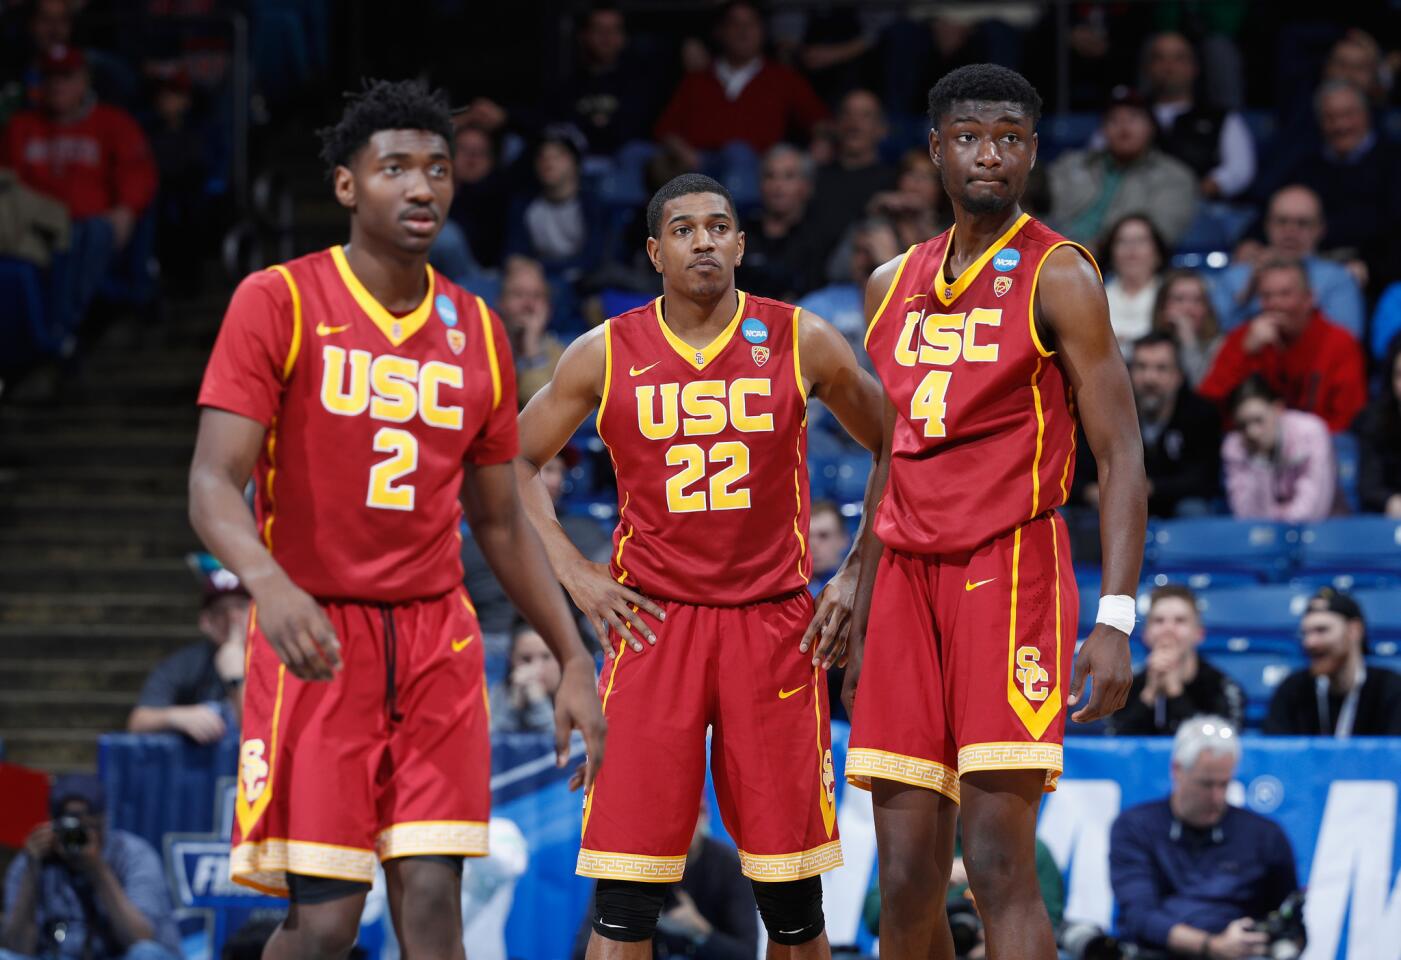 USC's Jonah Mathews (2), De'Anthony Melton (22) and Chimezie Metu (4) look on in the second half against Providence Friars during the First Four game in the 2017 NCAA Tournament.